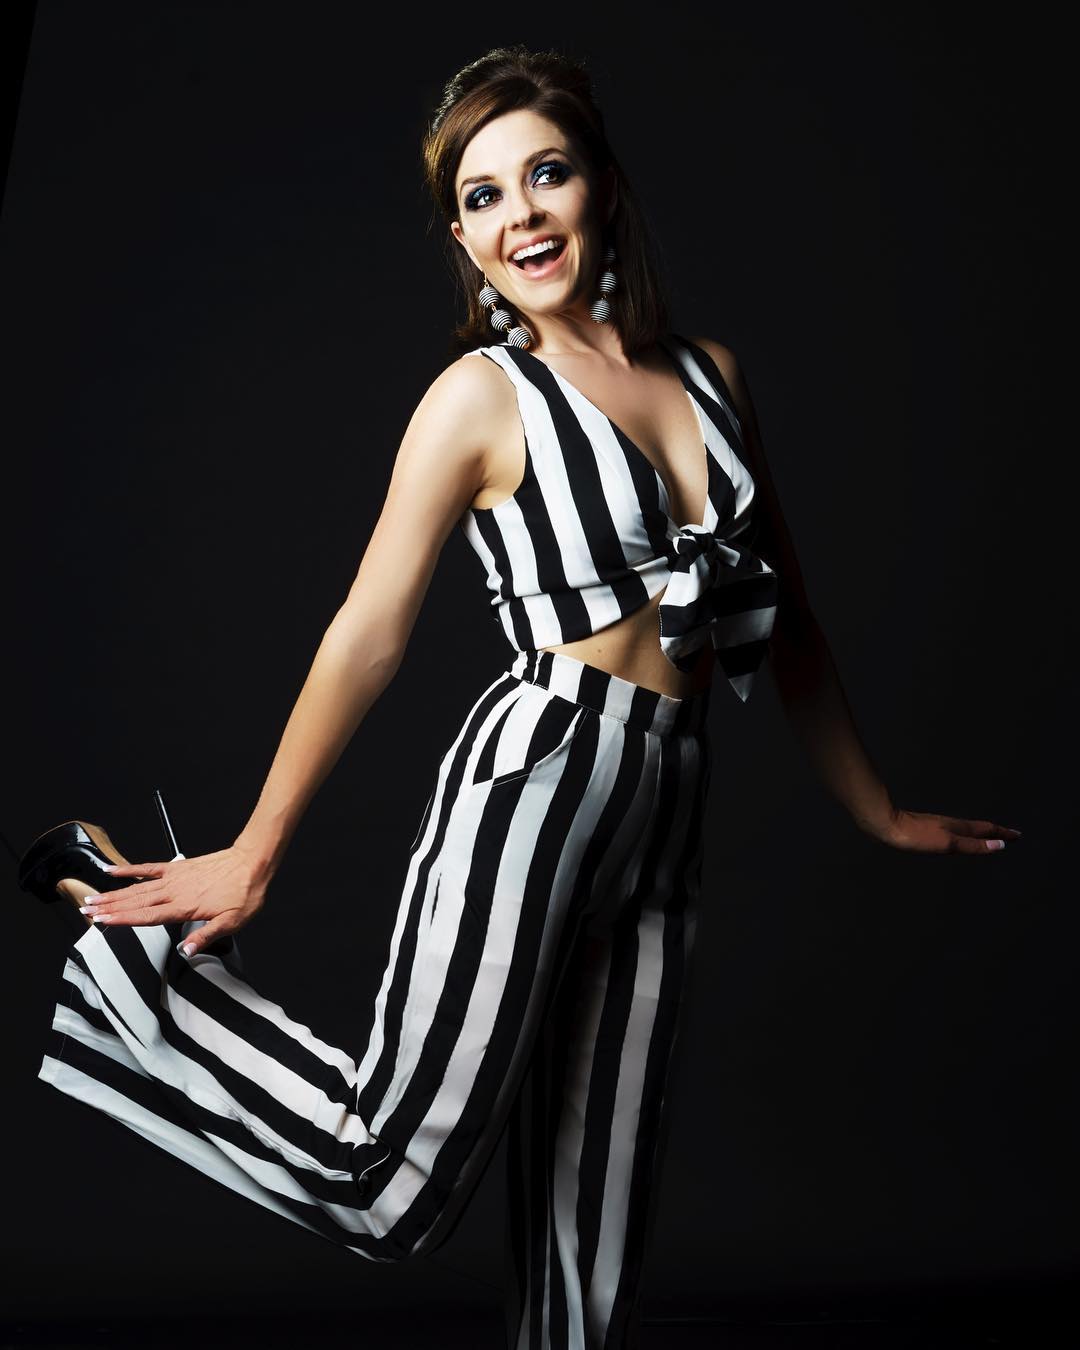 Hot Pictures Of Jen Lilley Which Will Make You Melt.